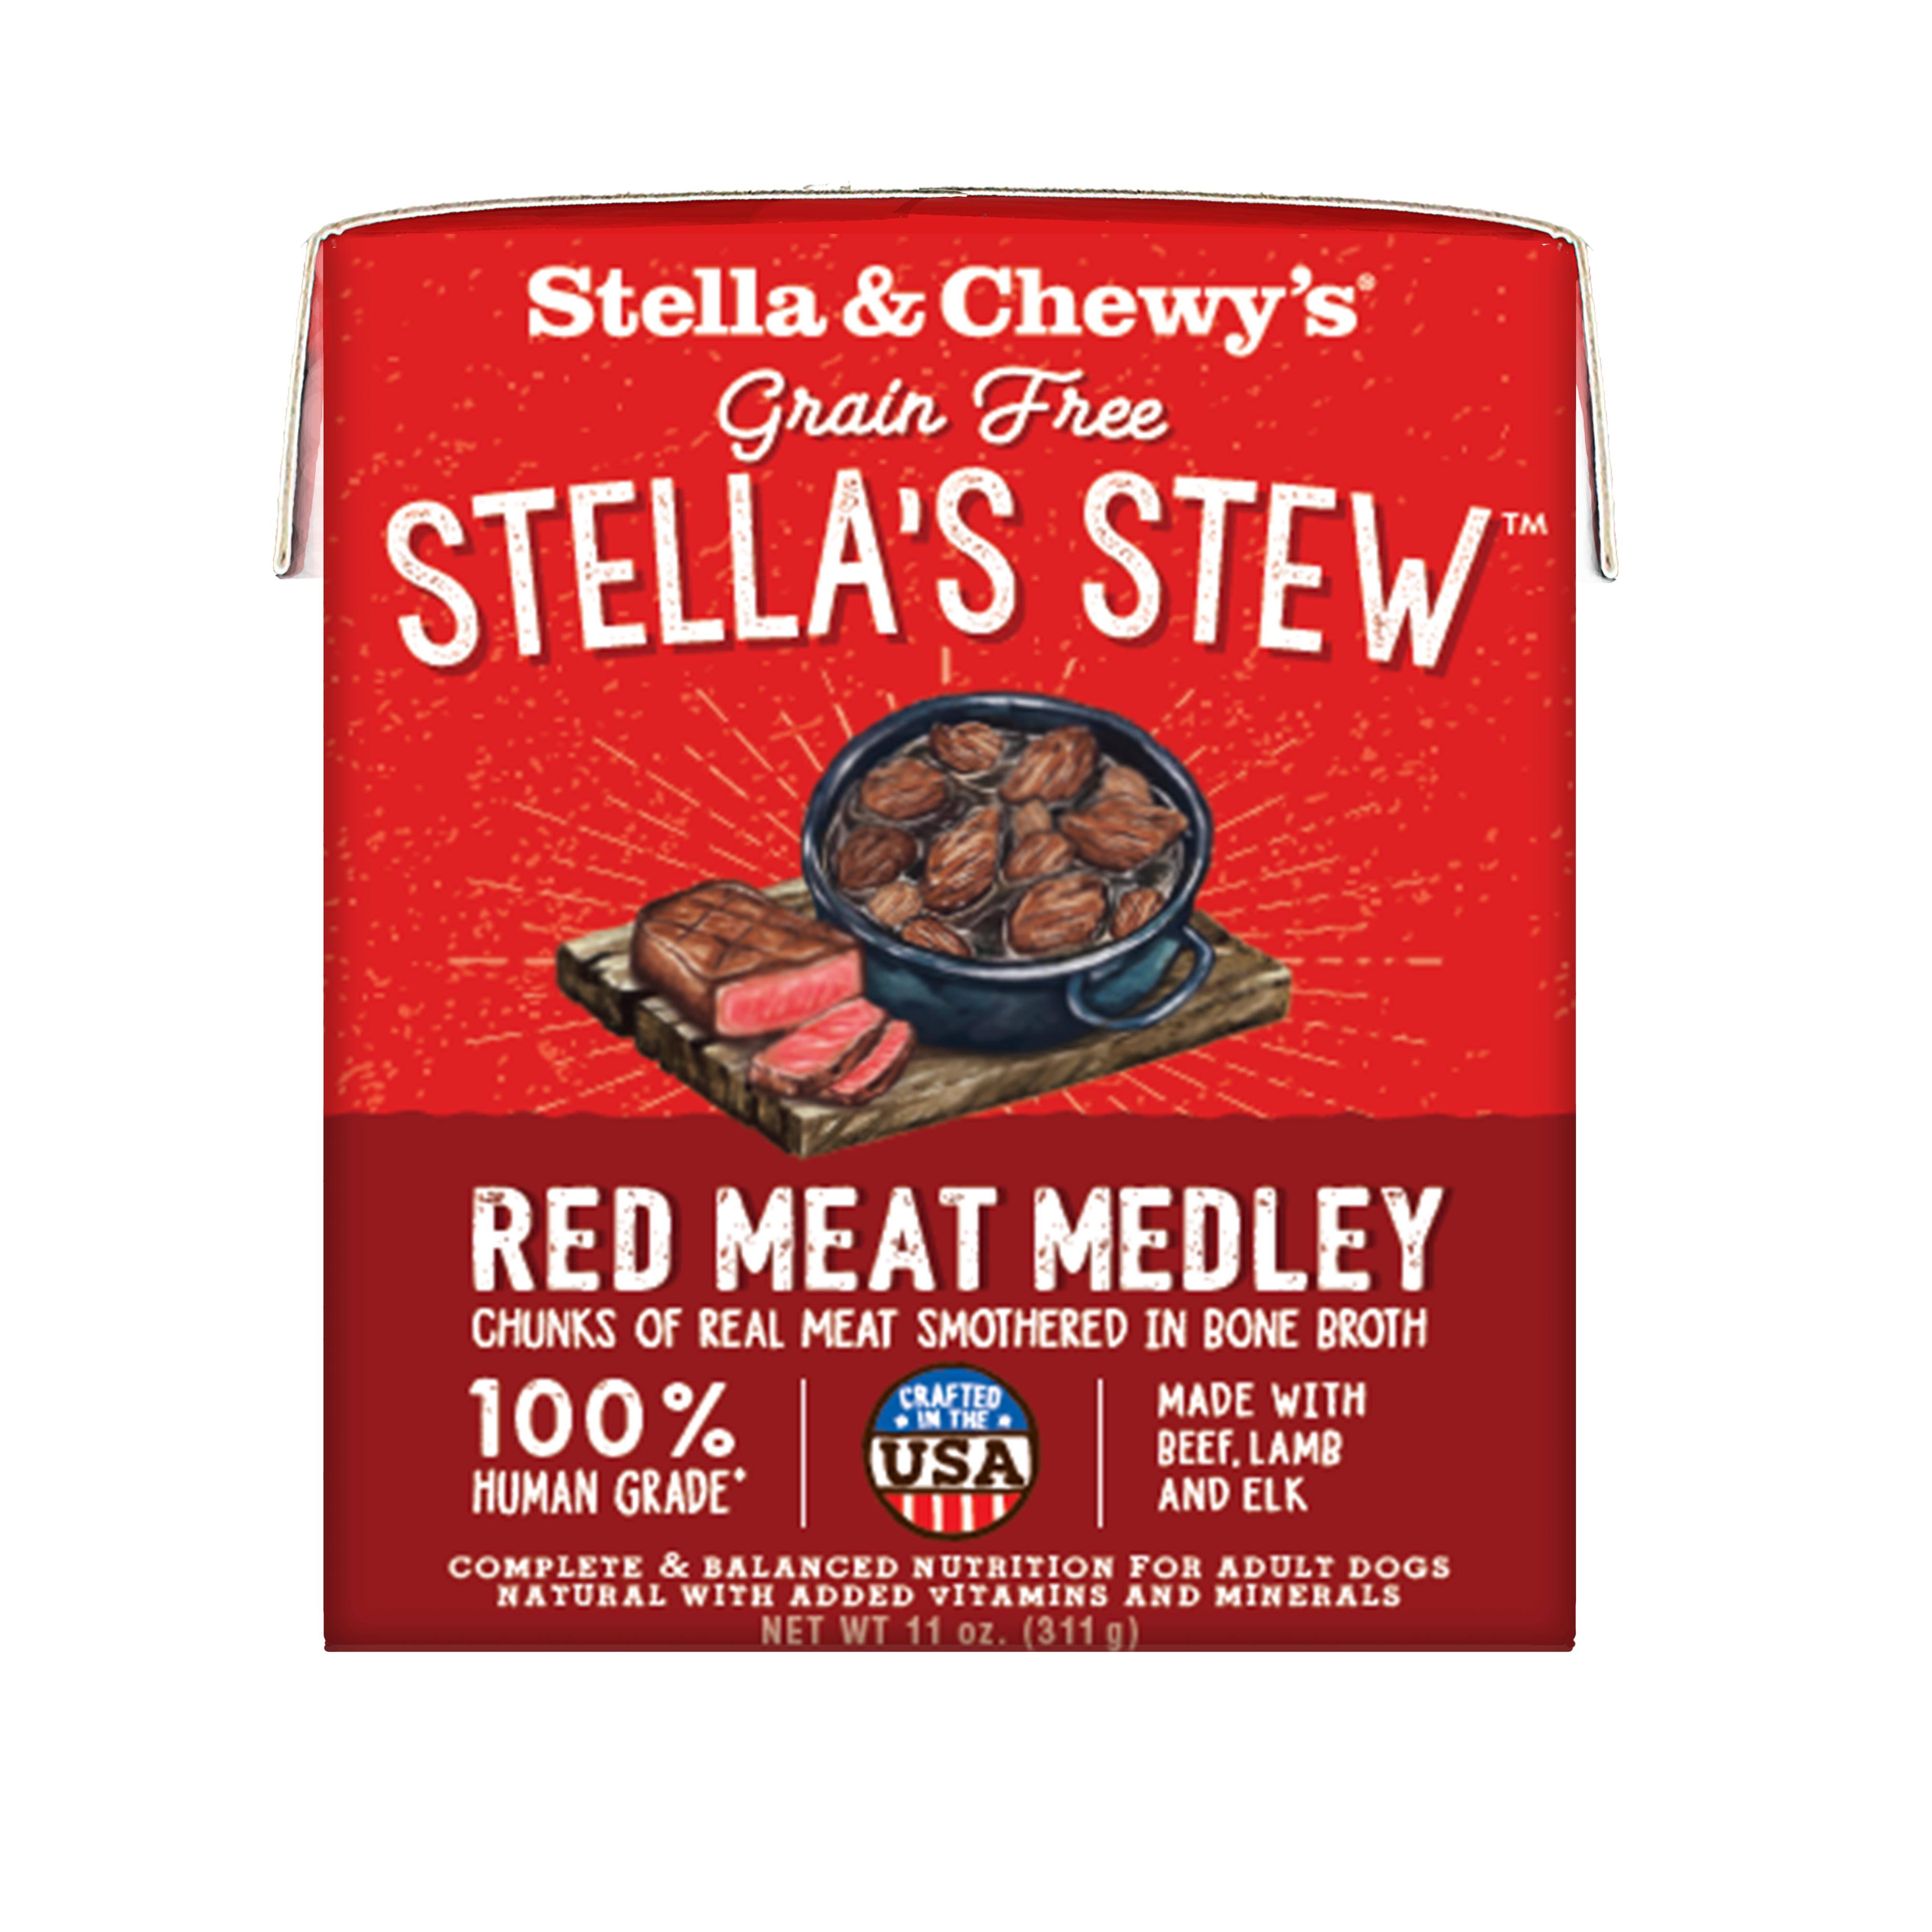 Stella & Chewy's Red Meat Medley Stew - 11 oz